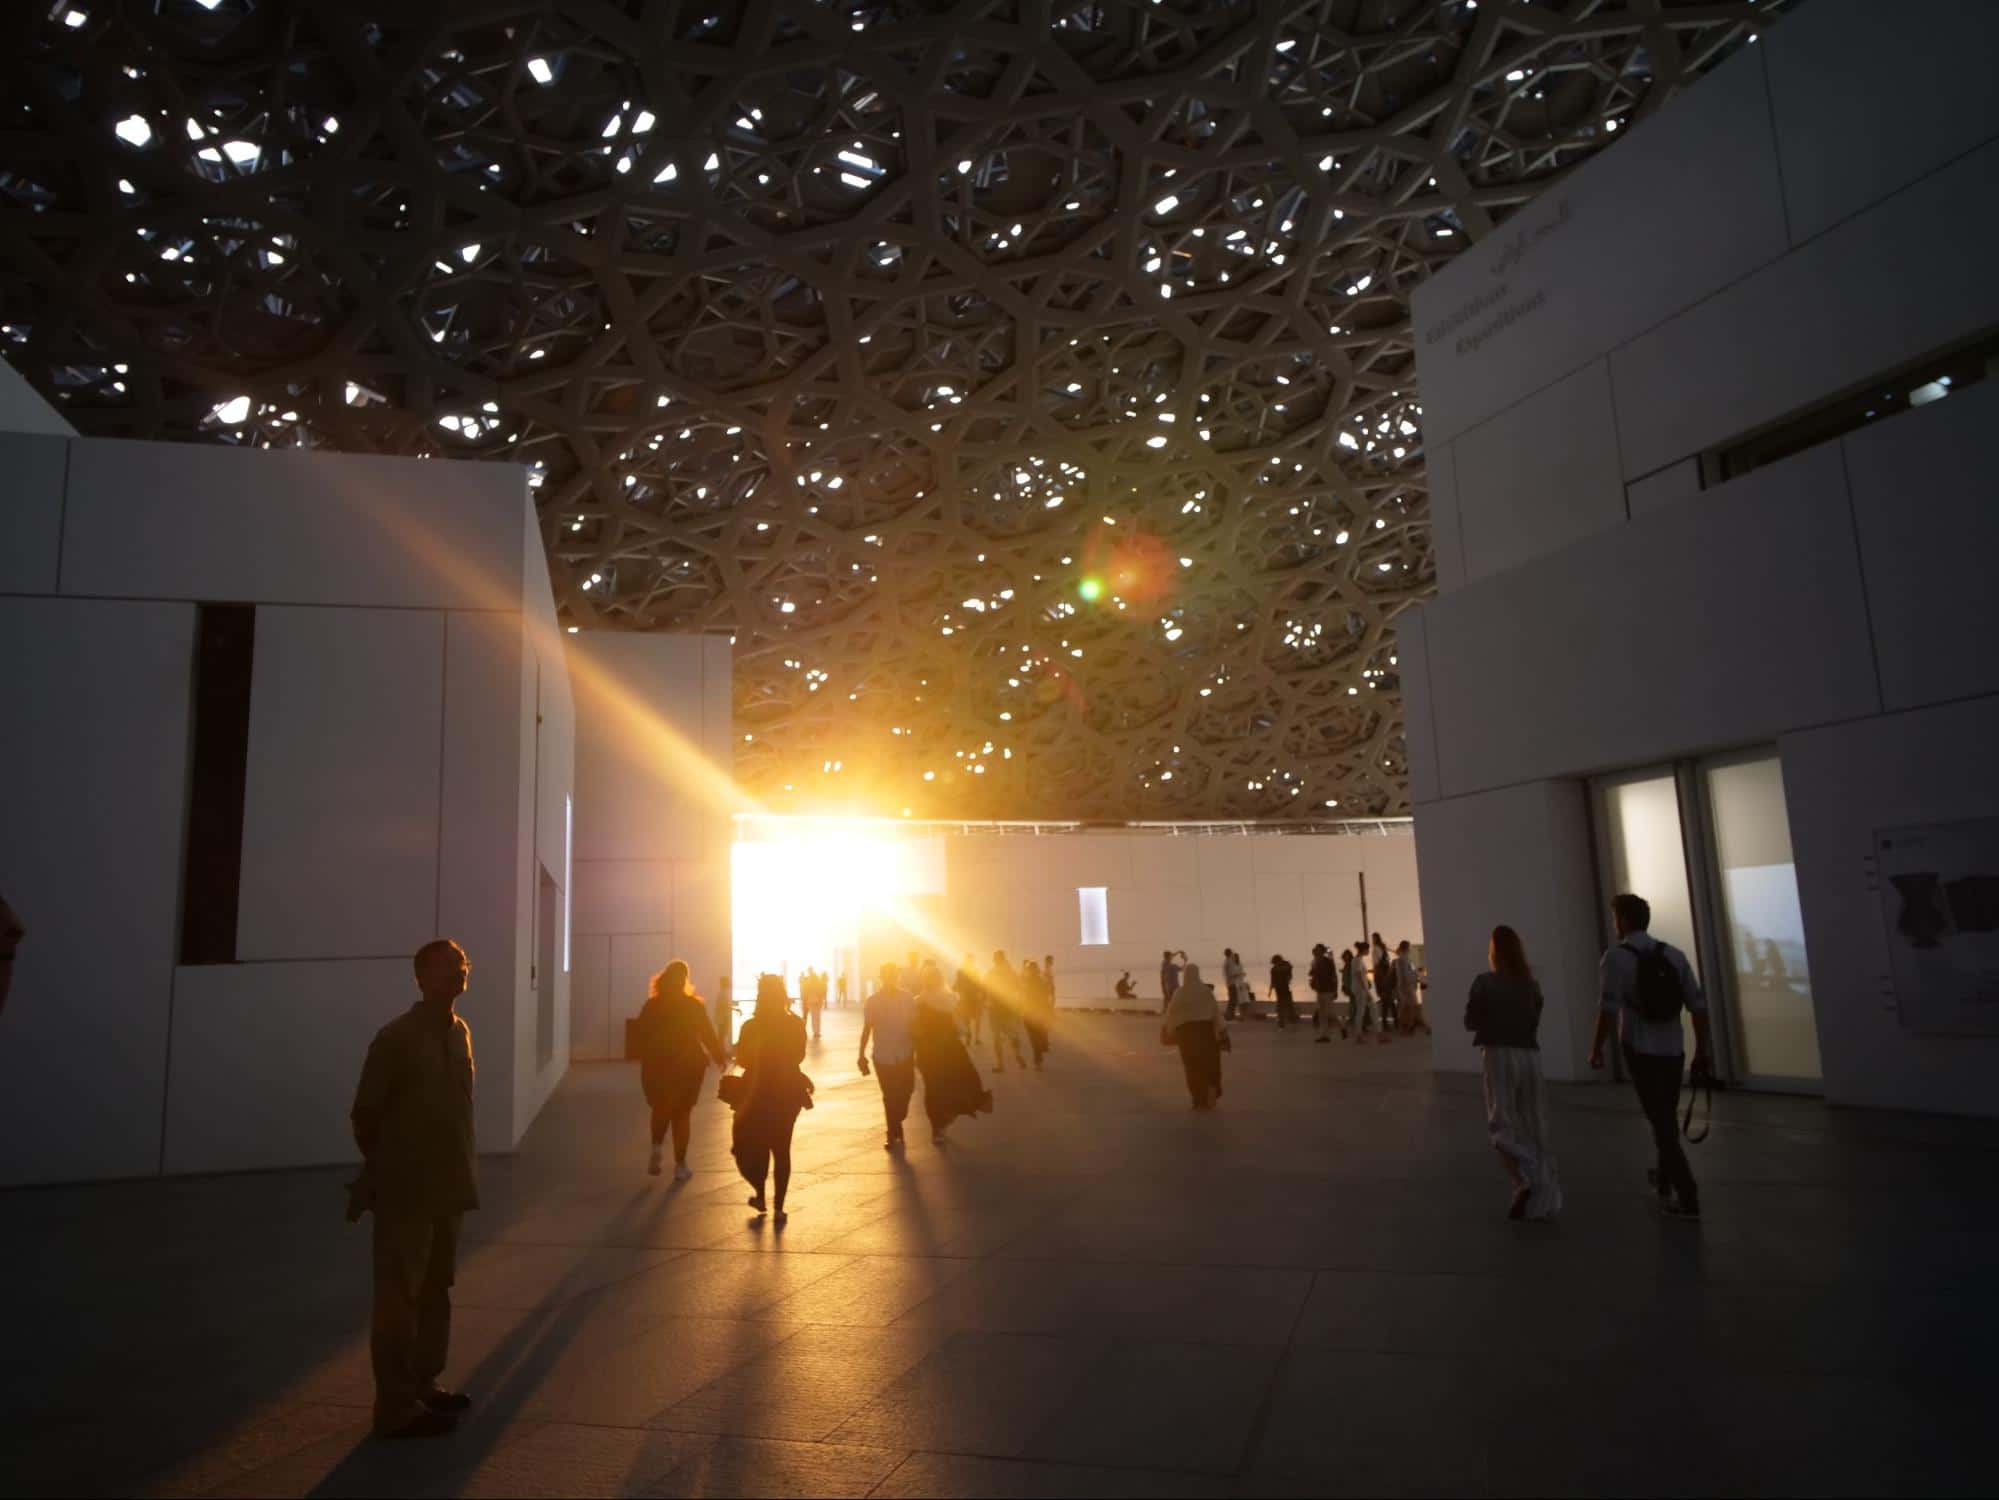 The Louvre Museum Abu Dhabi